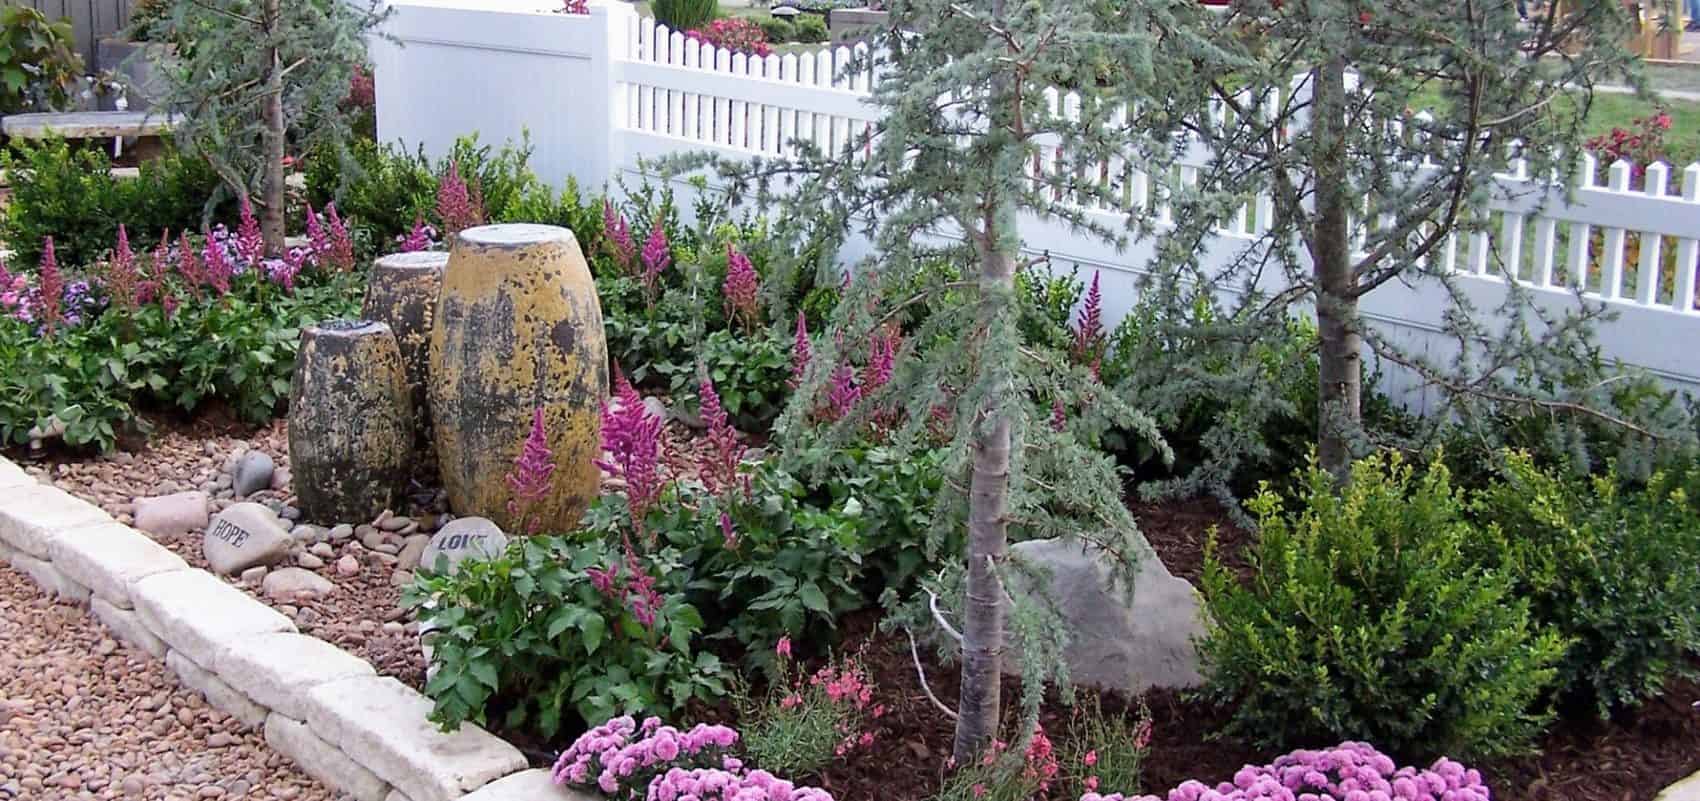 Outdoor decor in landscape bed